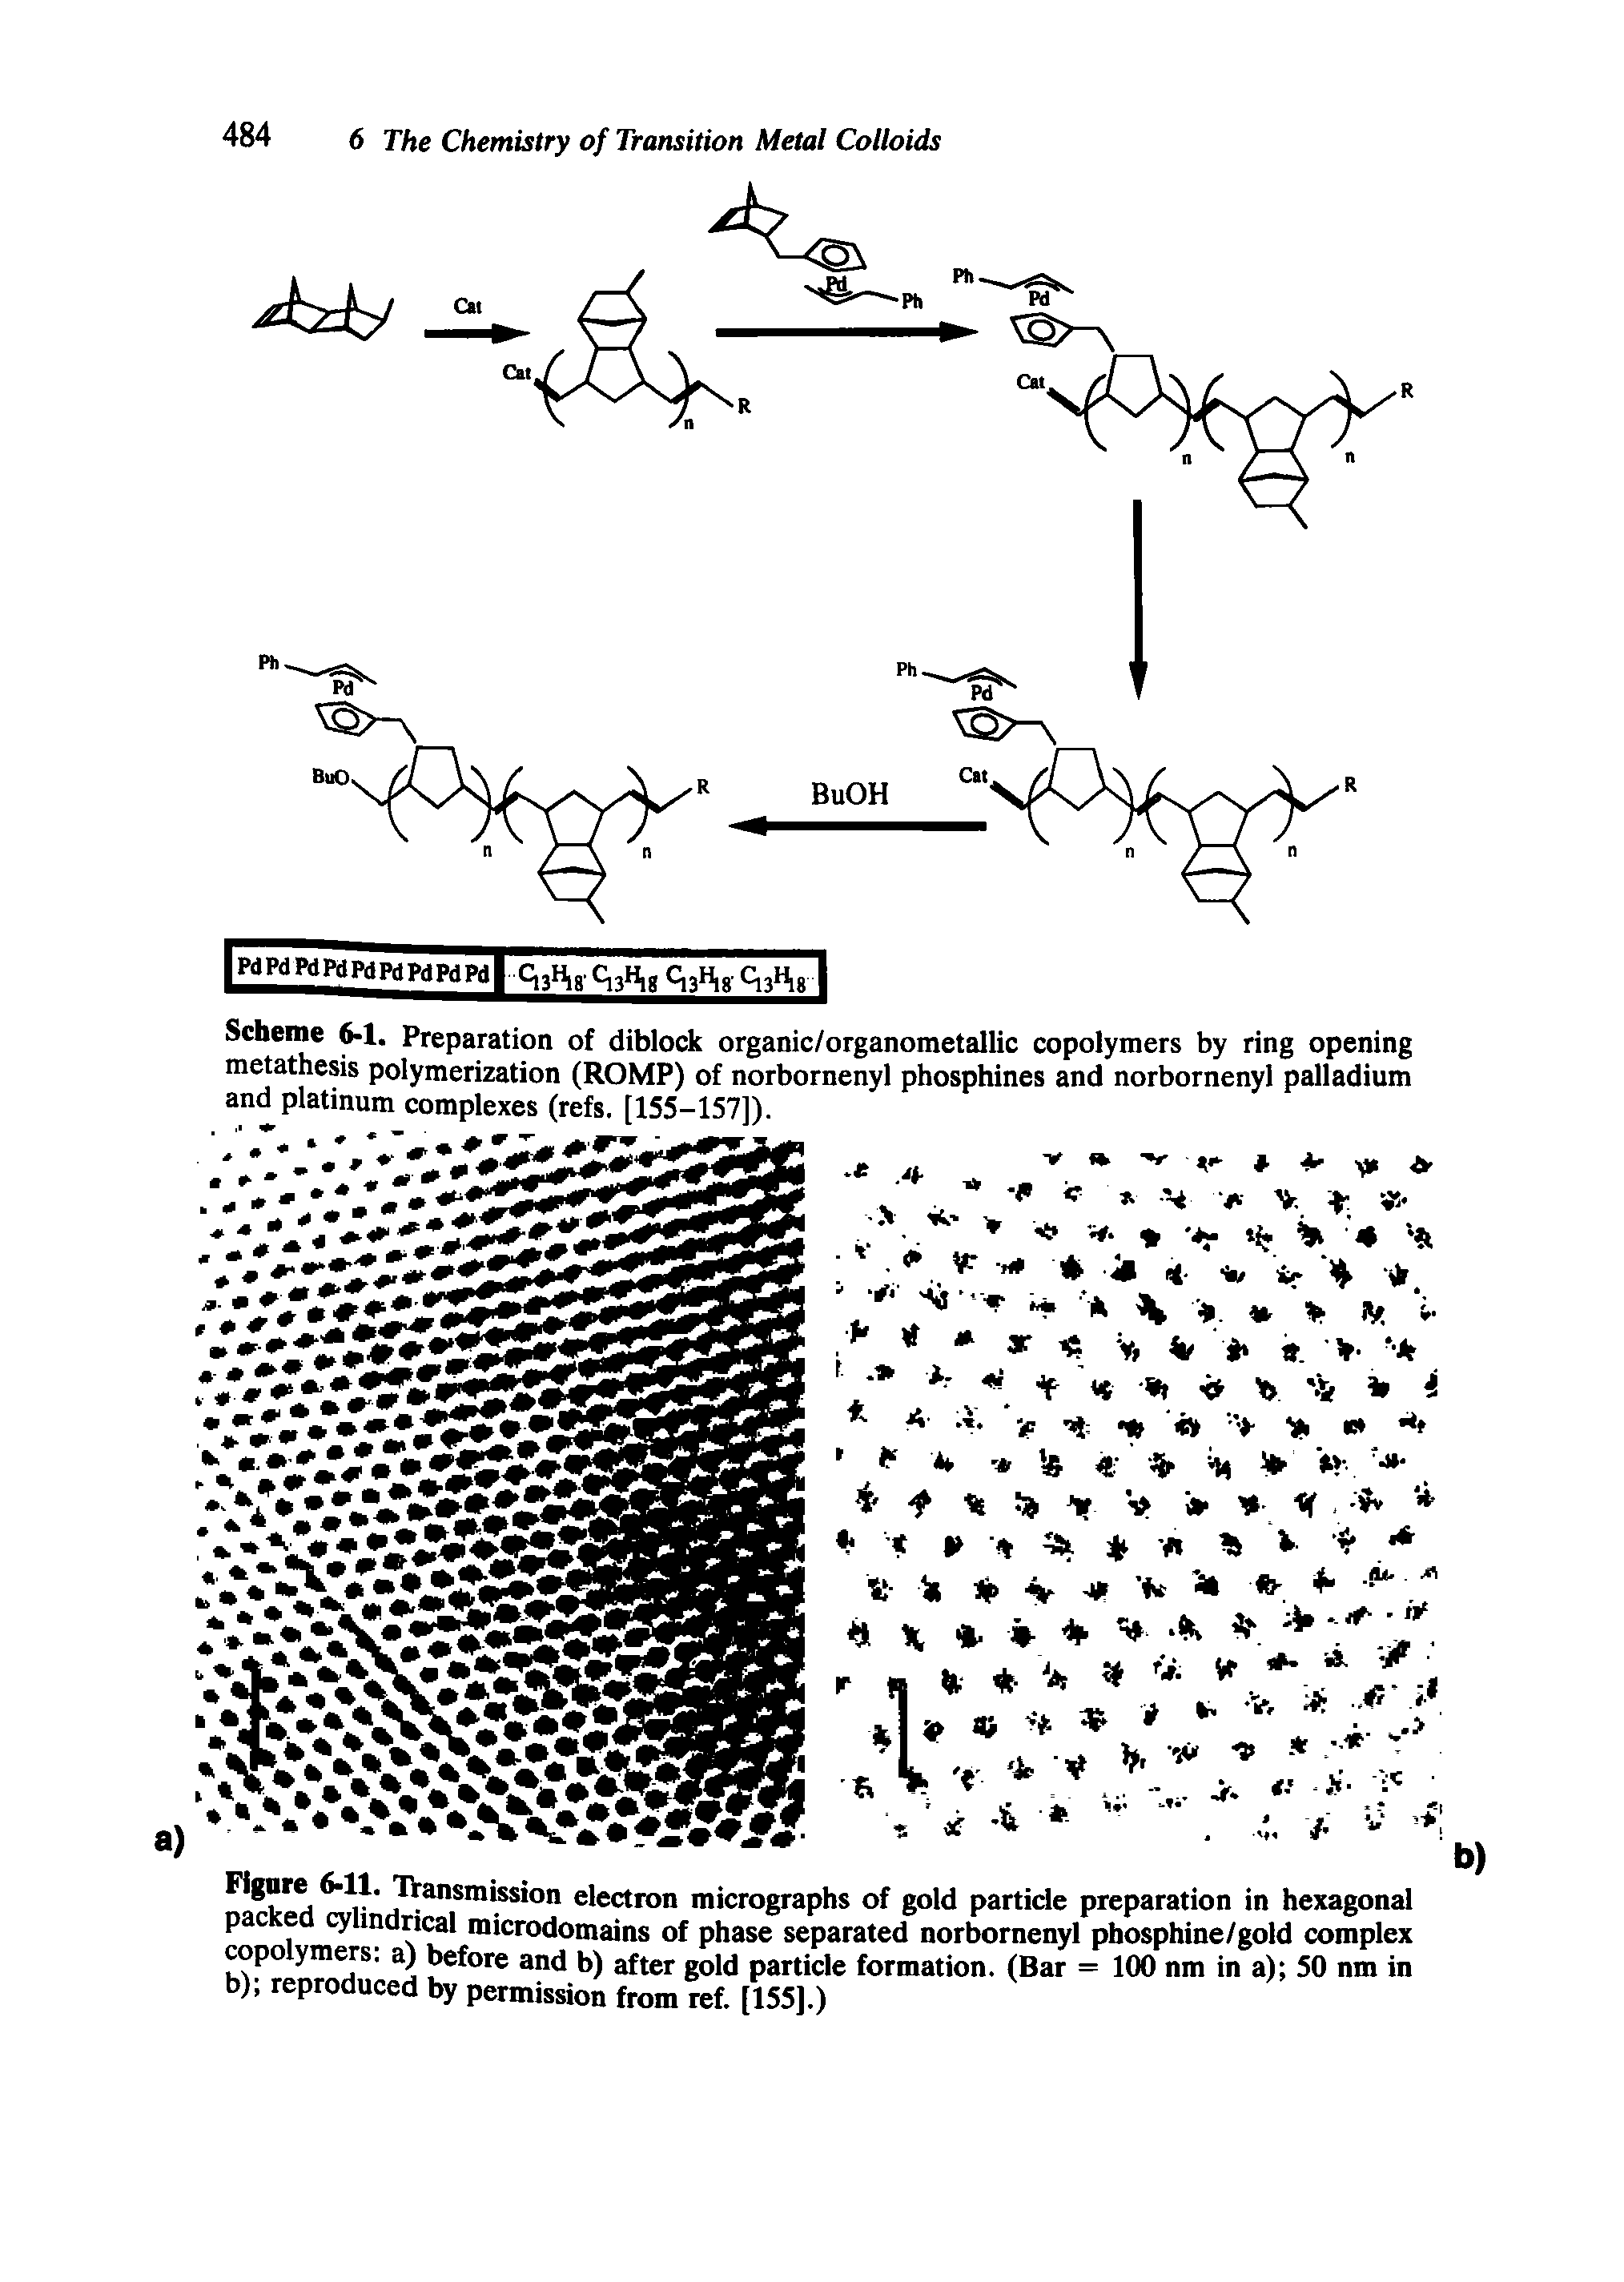 Figure 6-11. T smisston electron micrographs of gold partide preparation in hexagonal packed cylindrical microdomains of phase separated norbornenyl phosphine/gold complex copolymCTs a) before and b) after gold particle formation. (Bar = 100 nm in a) 50 nm in b) reproduced by permission from ref. [155J.)...